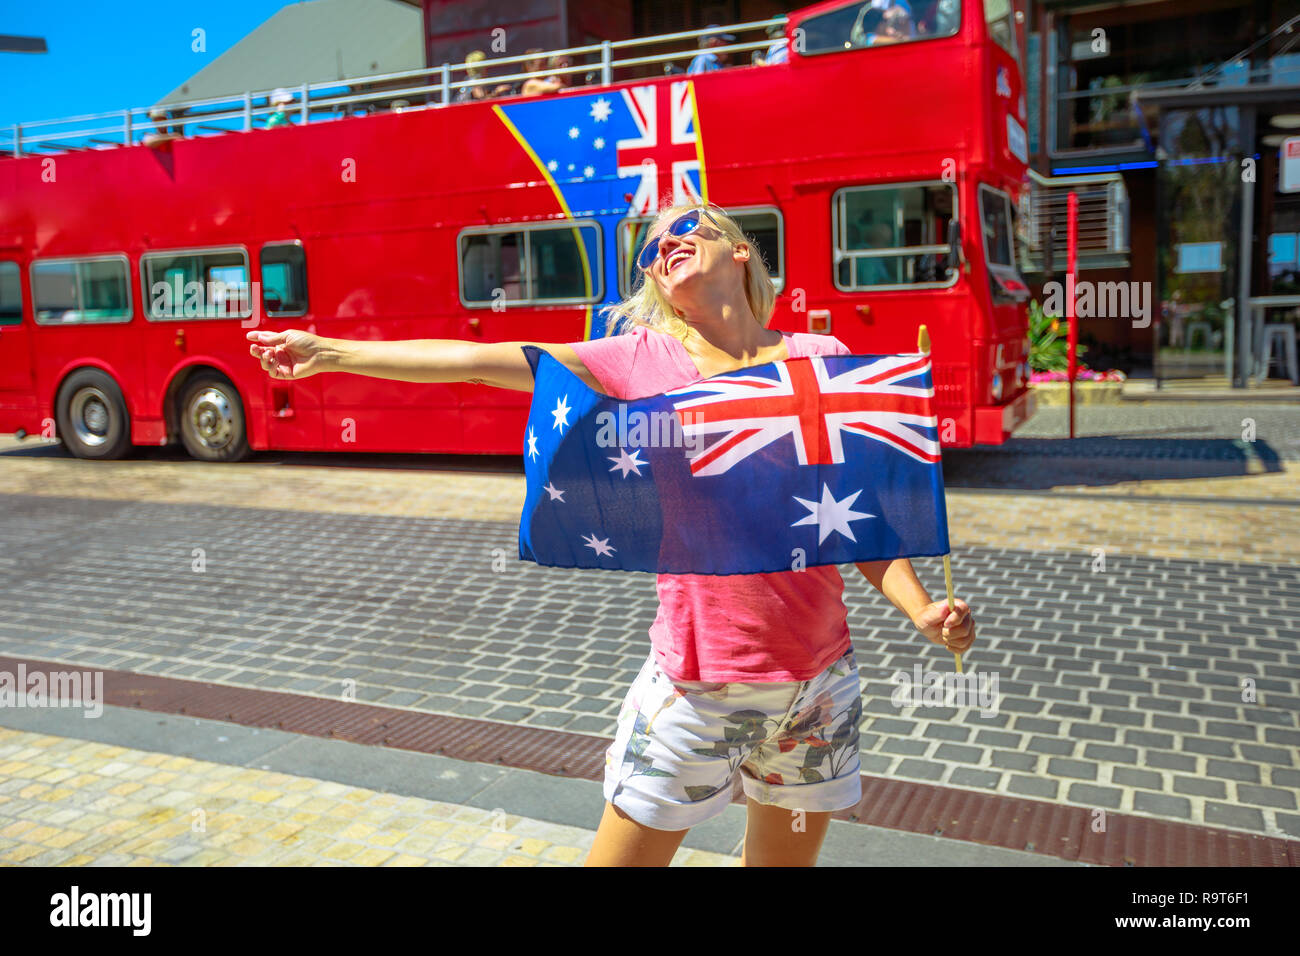 Blonde woman with Australian flag at Barrack Square near Bell Tower and Elizabeth Quay in Perth, Western Australia. Happy girl enjoys Perth downtown. Iconic open tourist bus on blurred background. Stock Photo